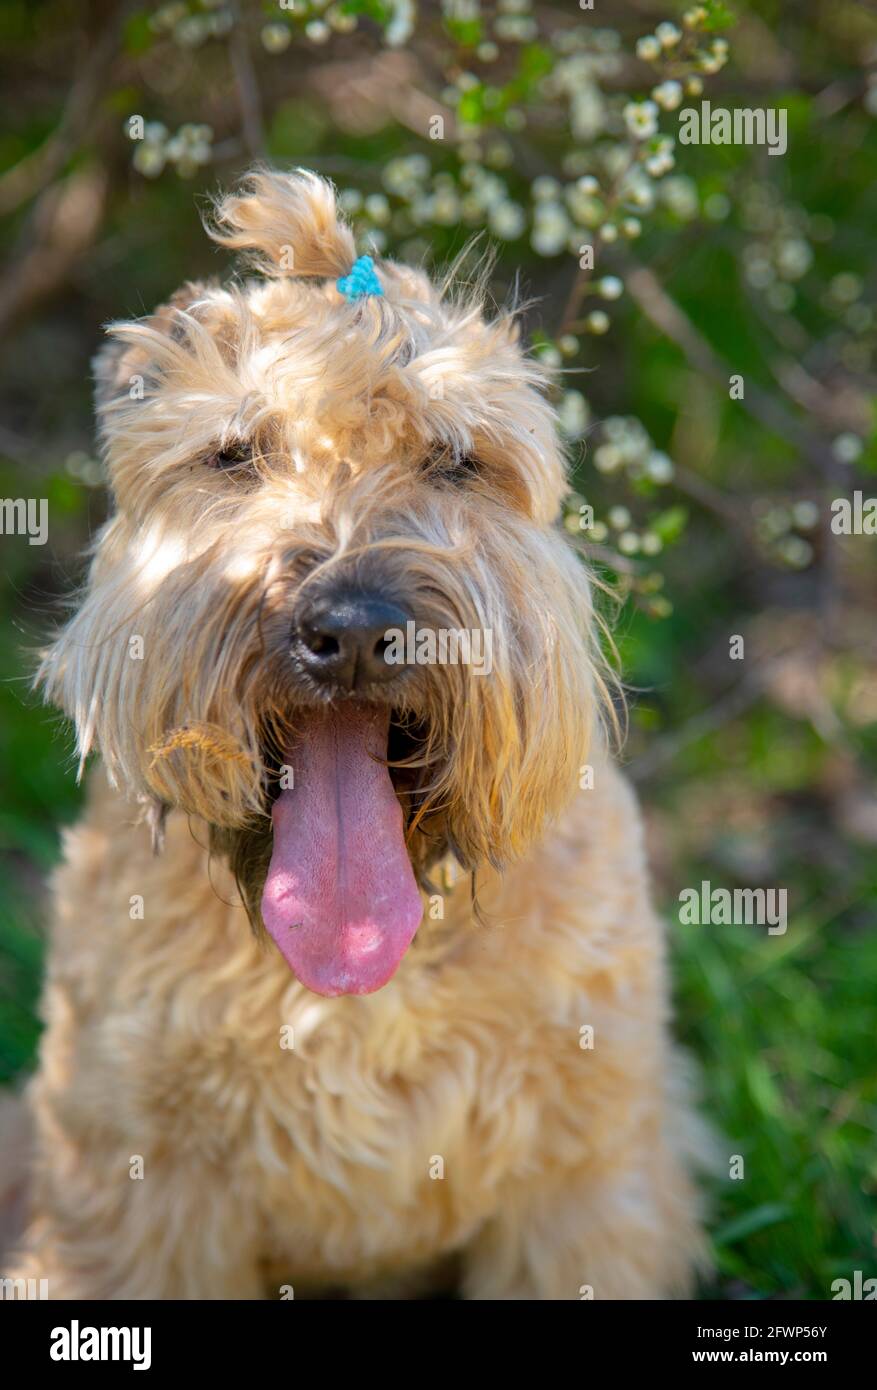 Irish soft coated wheaten terrier. Portrait of a fluffy dog on a background  of cherry blossoms Stock Photo - Alamy